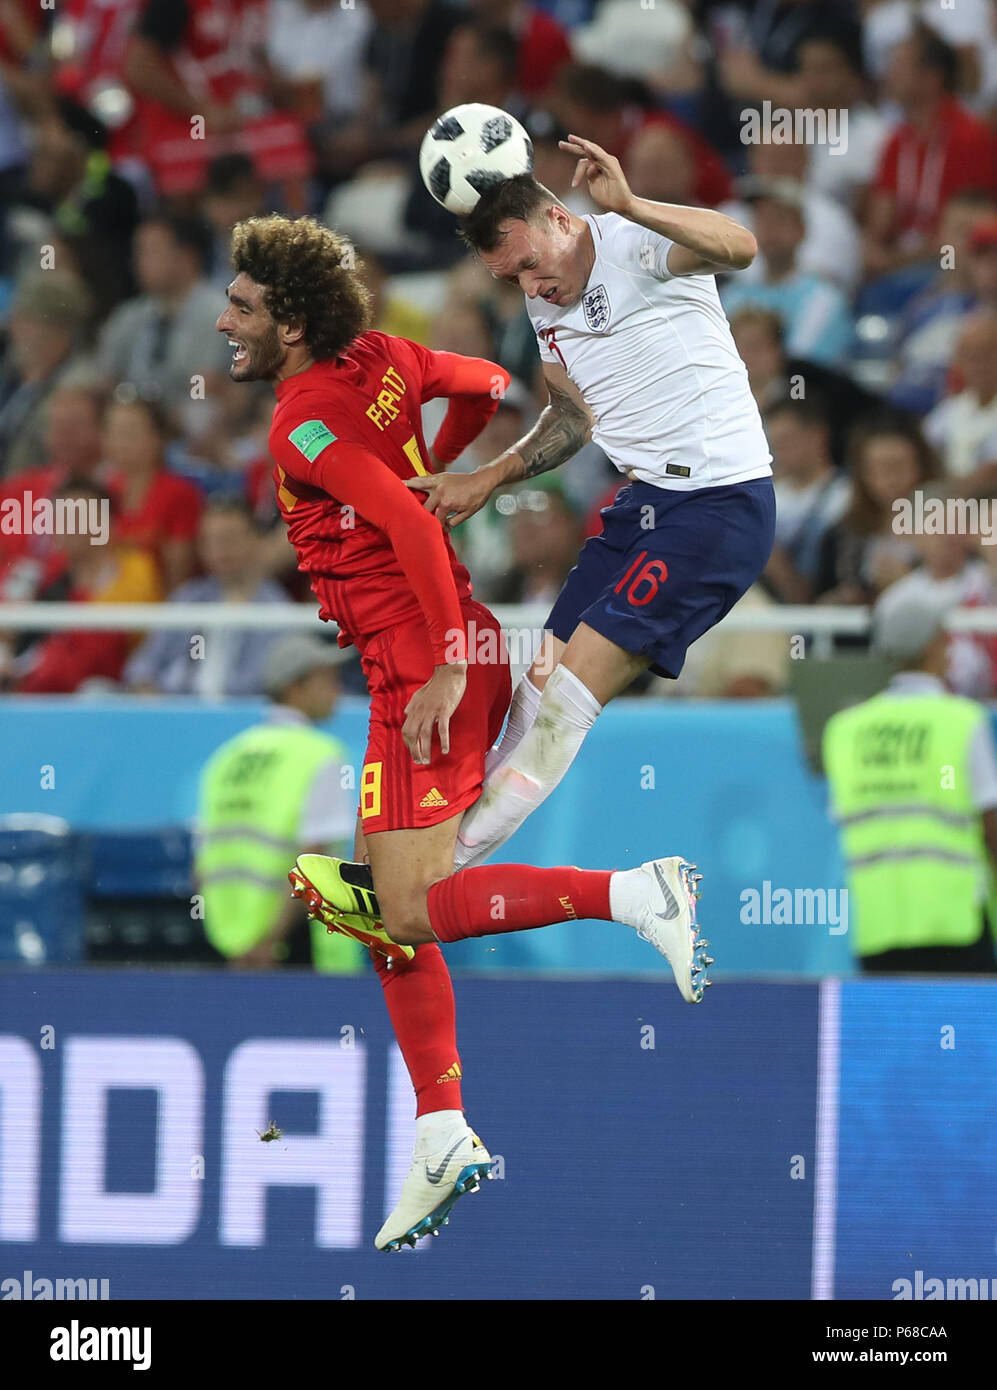 Kaliningrad, Russia. 28th June, 2018. Phil Jones (R) of England competes for a header with Marouane Fellaini of Belgium during the 2018 FIFA World Cup Group G match between England and Belgium in Kaliningrad, Russia, June 28, 2018. Credit: Xu Zijian/Xinhua/Alamy Live News Stock Photo